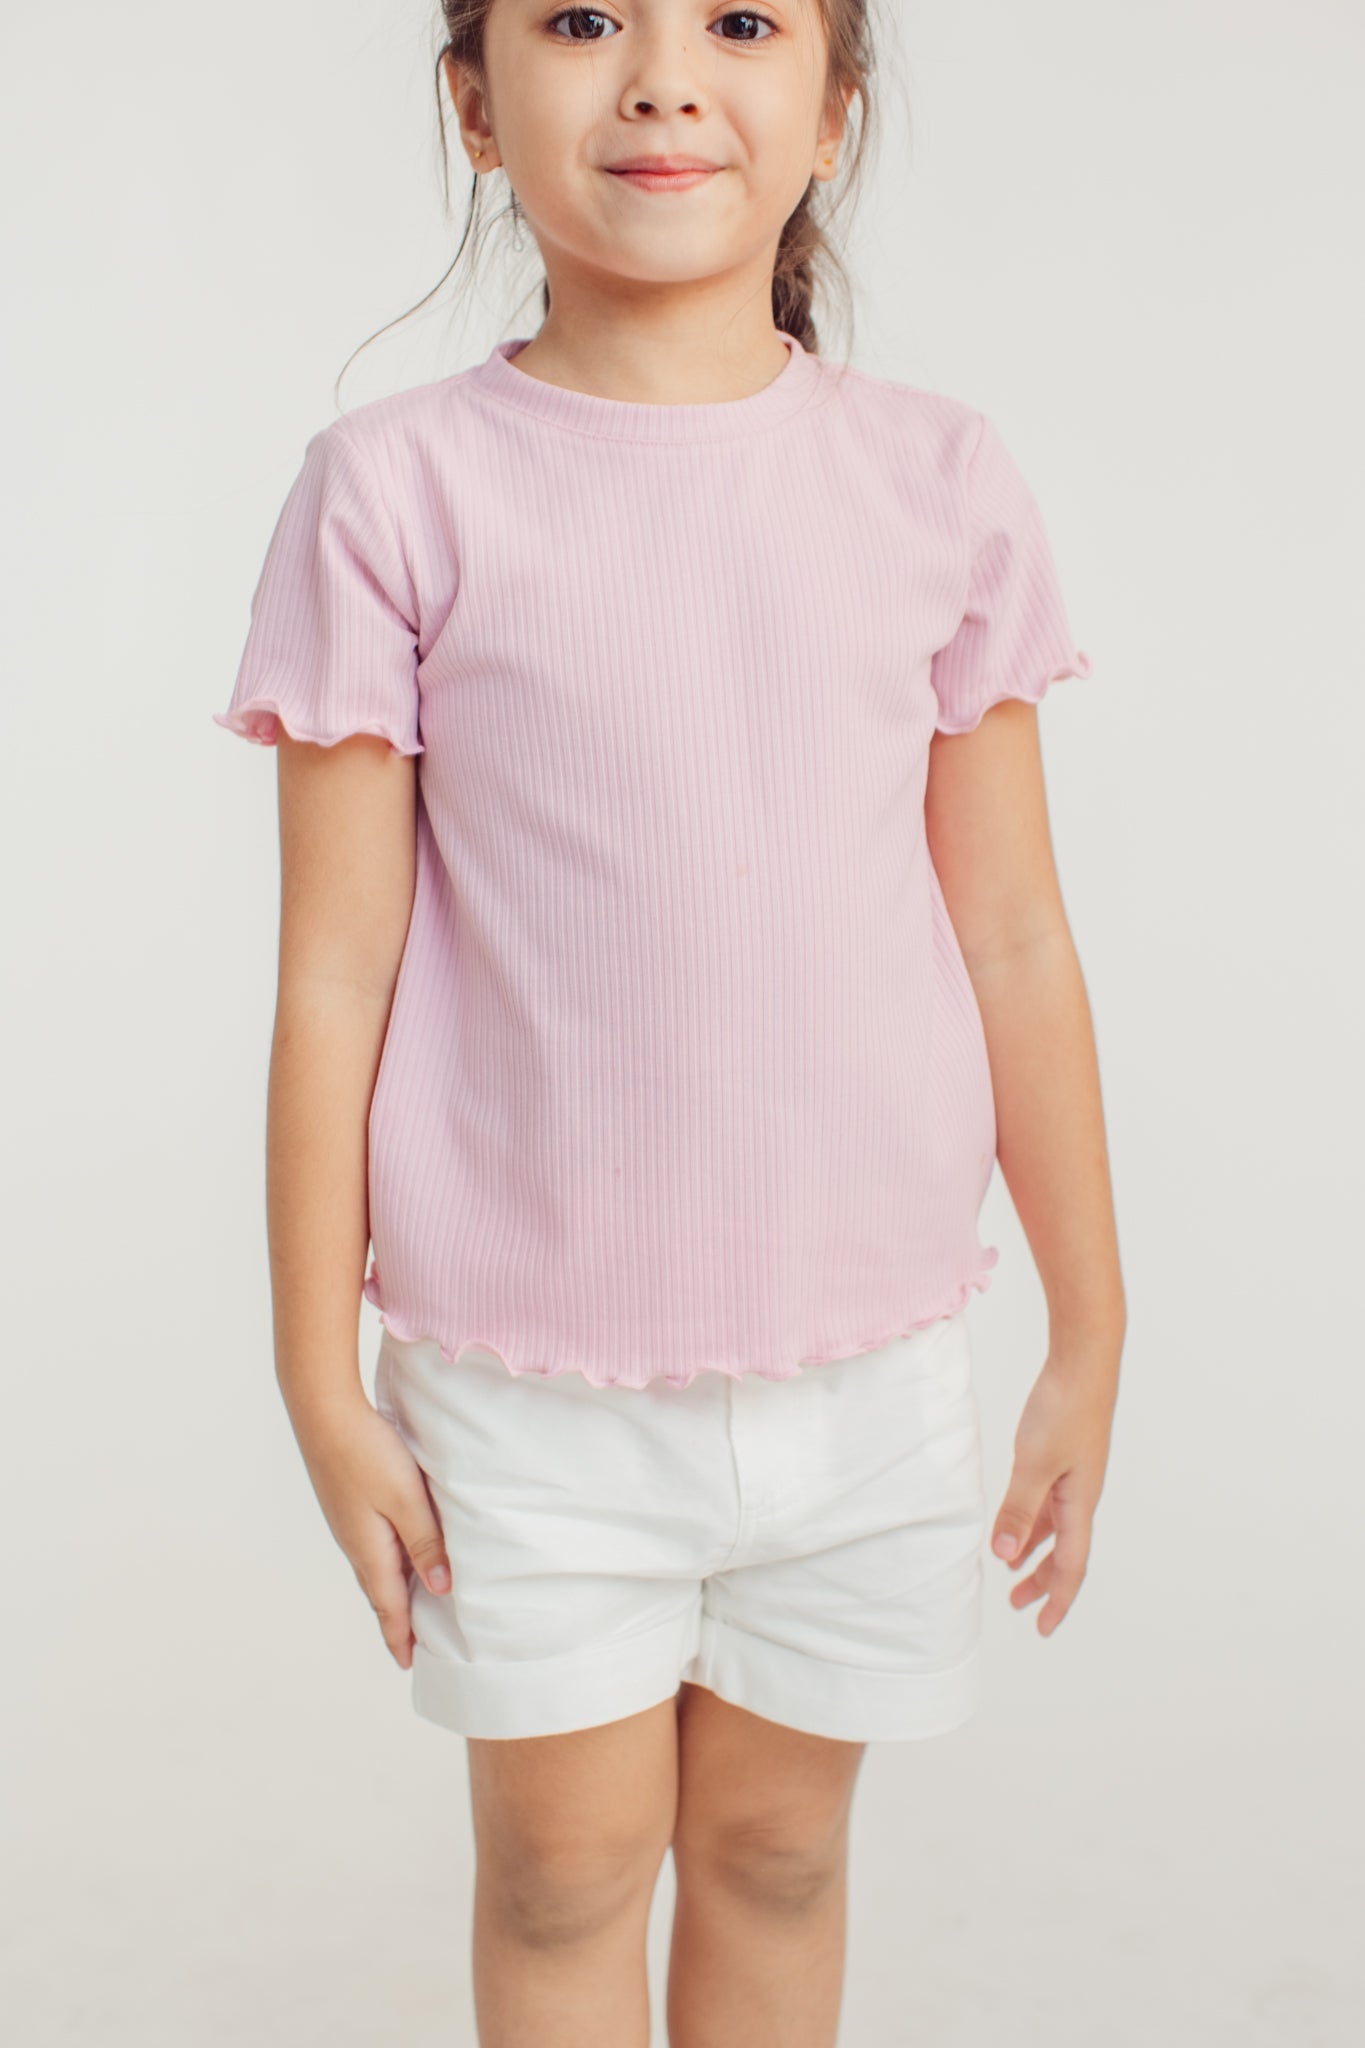 Girls Ribbed Top with Overlocked Edges Kids - Mossimo PH